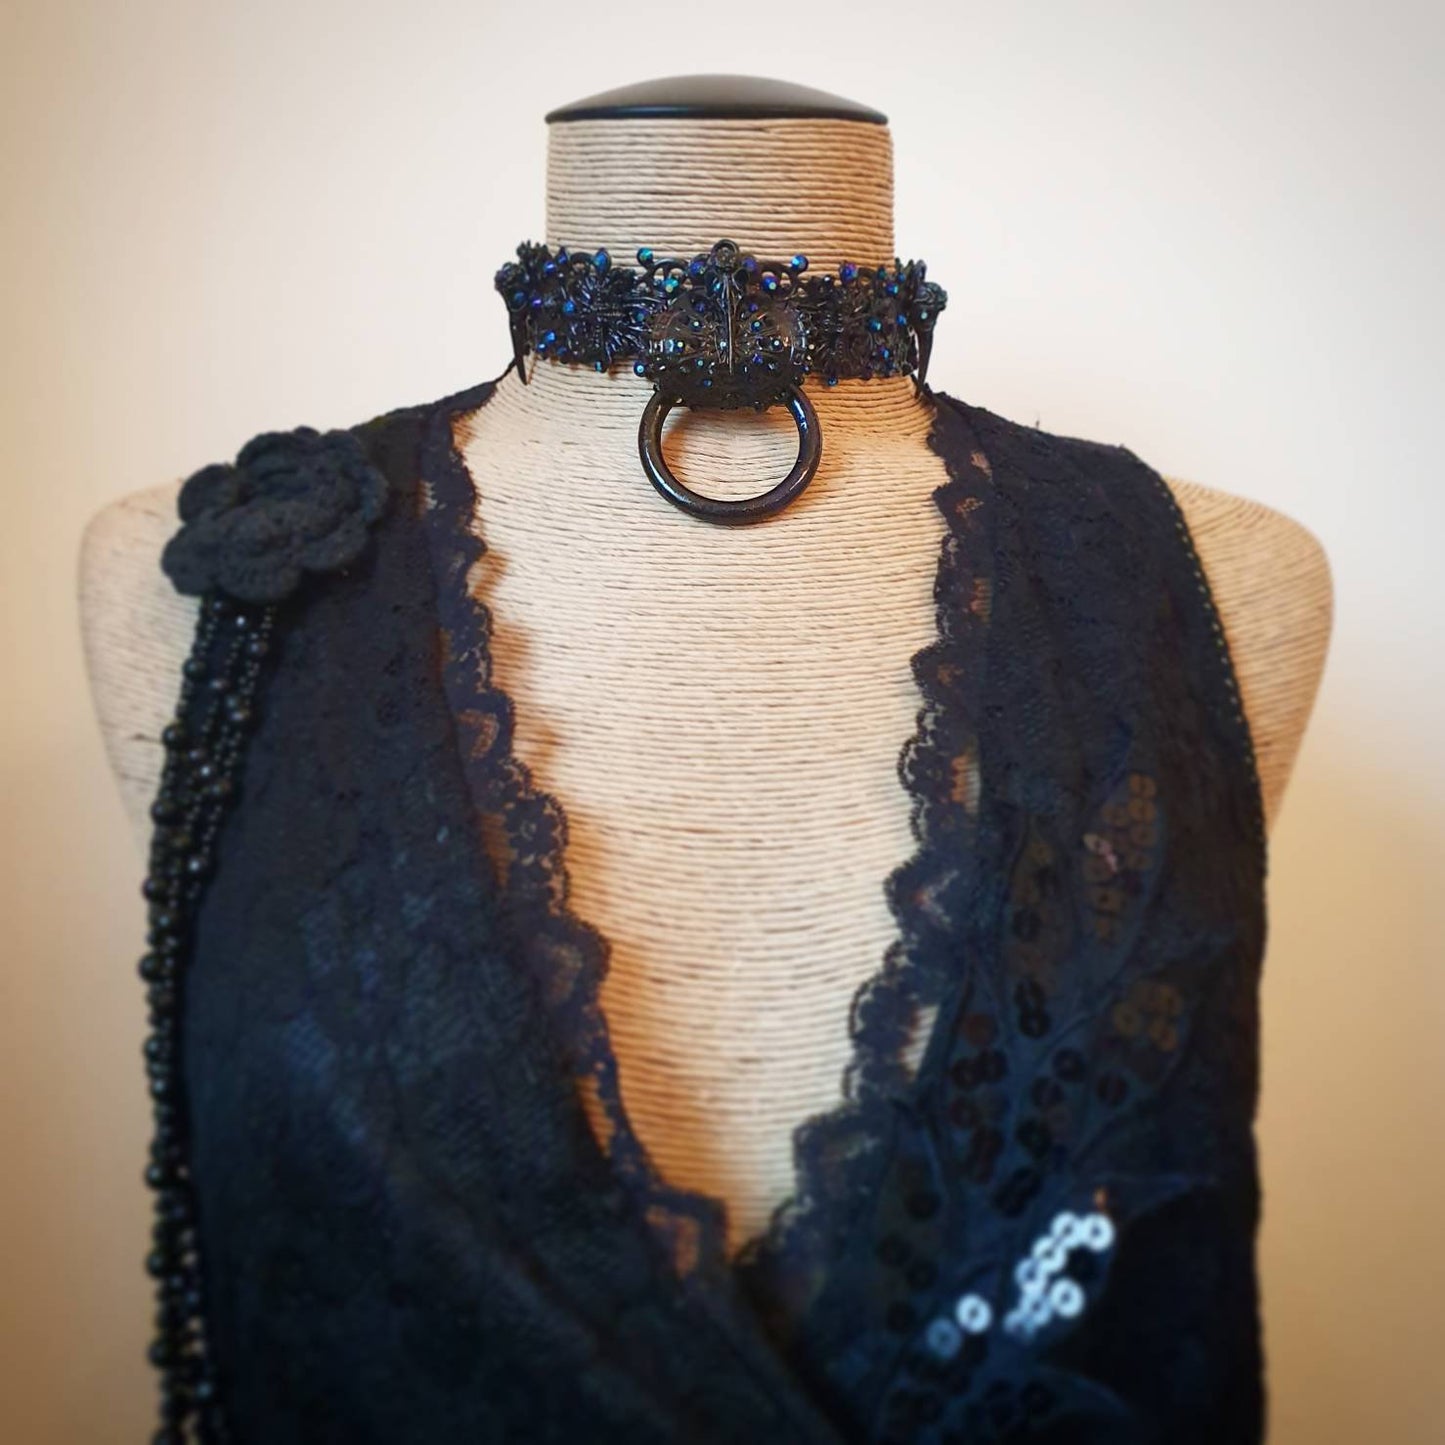 Raven's Graveyard Metal Choker in black w irredecent blue and black rhinestones, sample couture show piece